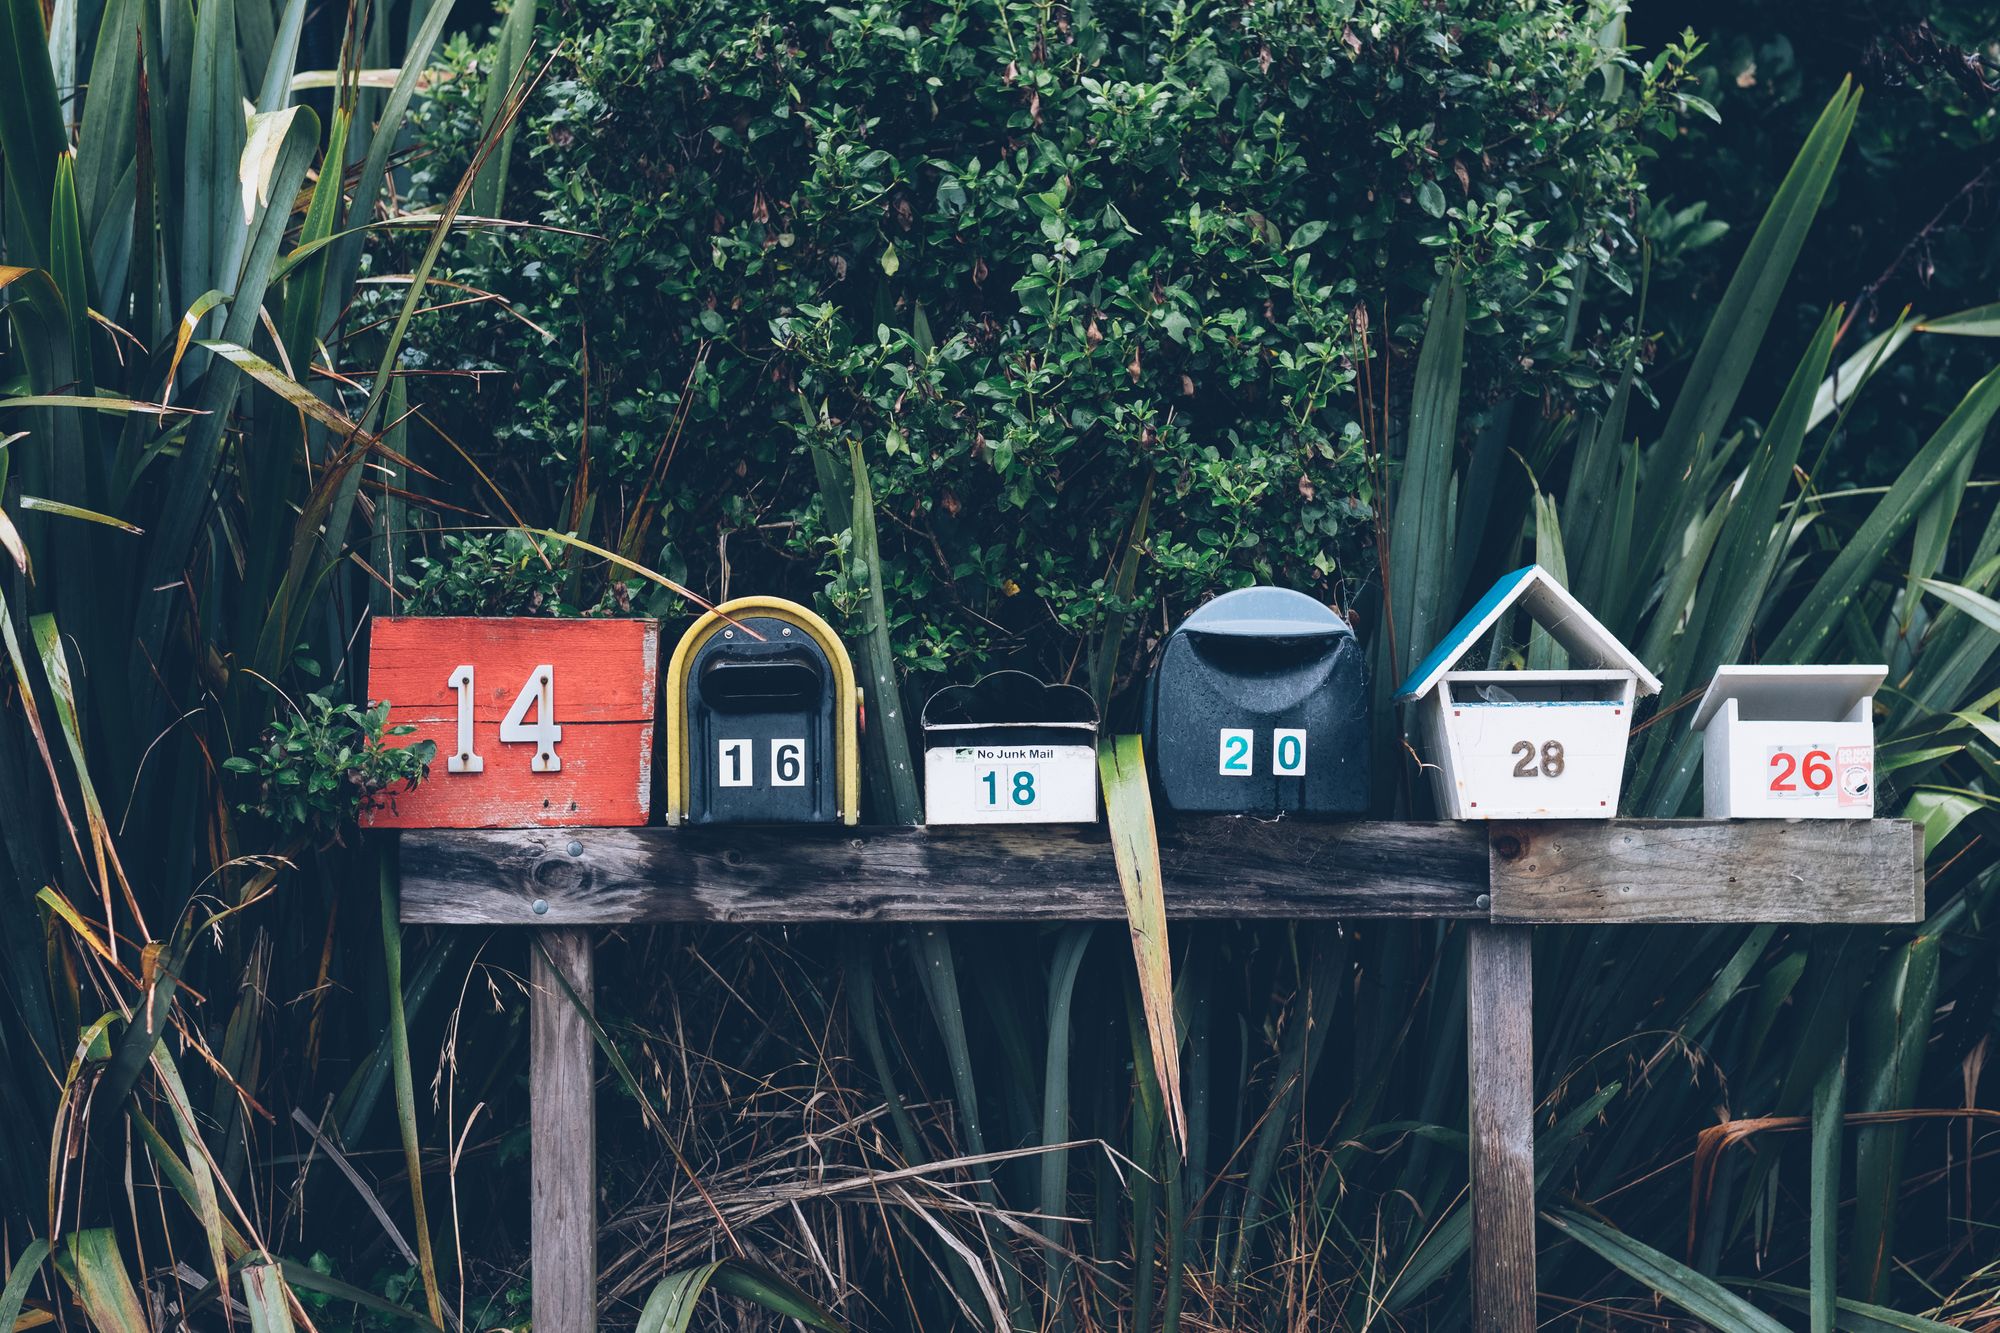 On Email Deliverability: Writing Emails that Reach the Inbox.